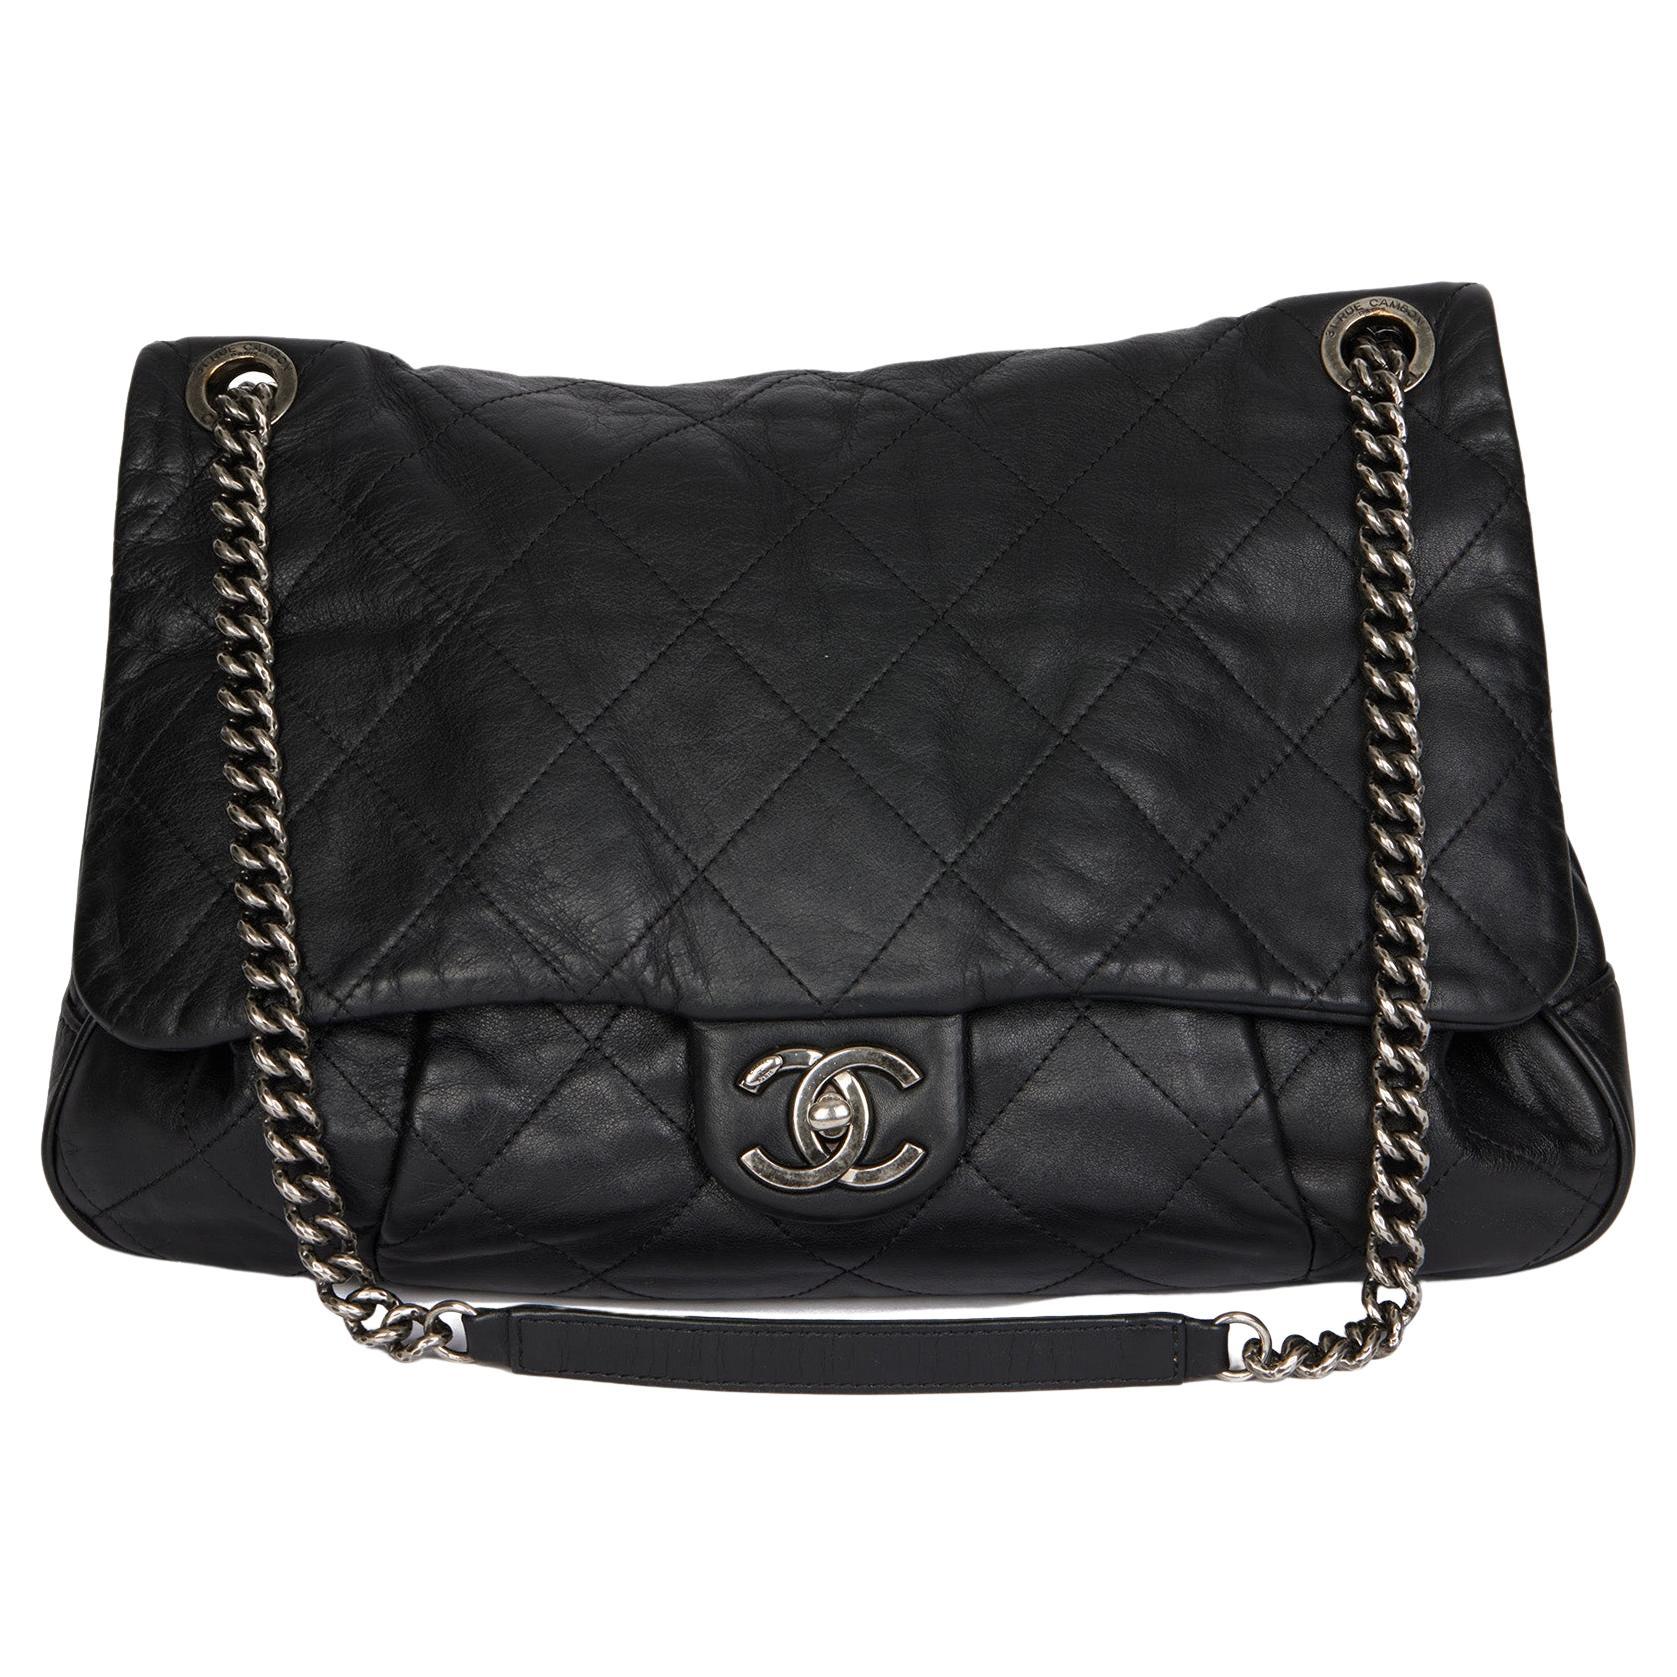 CHANEL Black Quilted Lambskin Coco Pleats Flap Bag